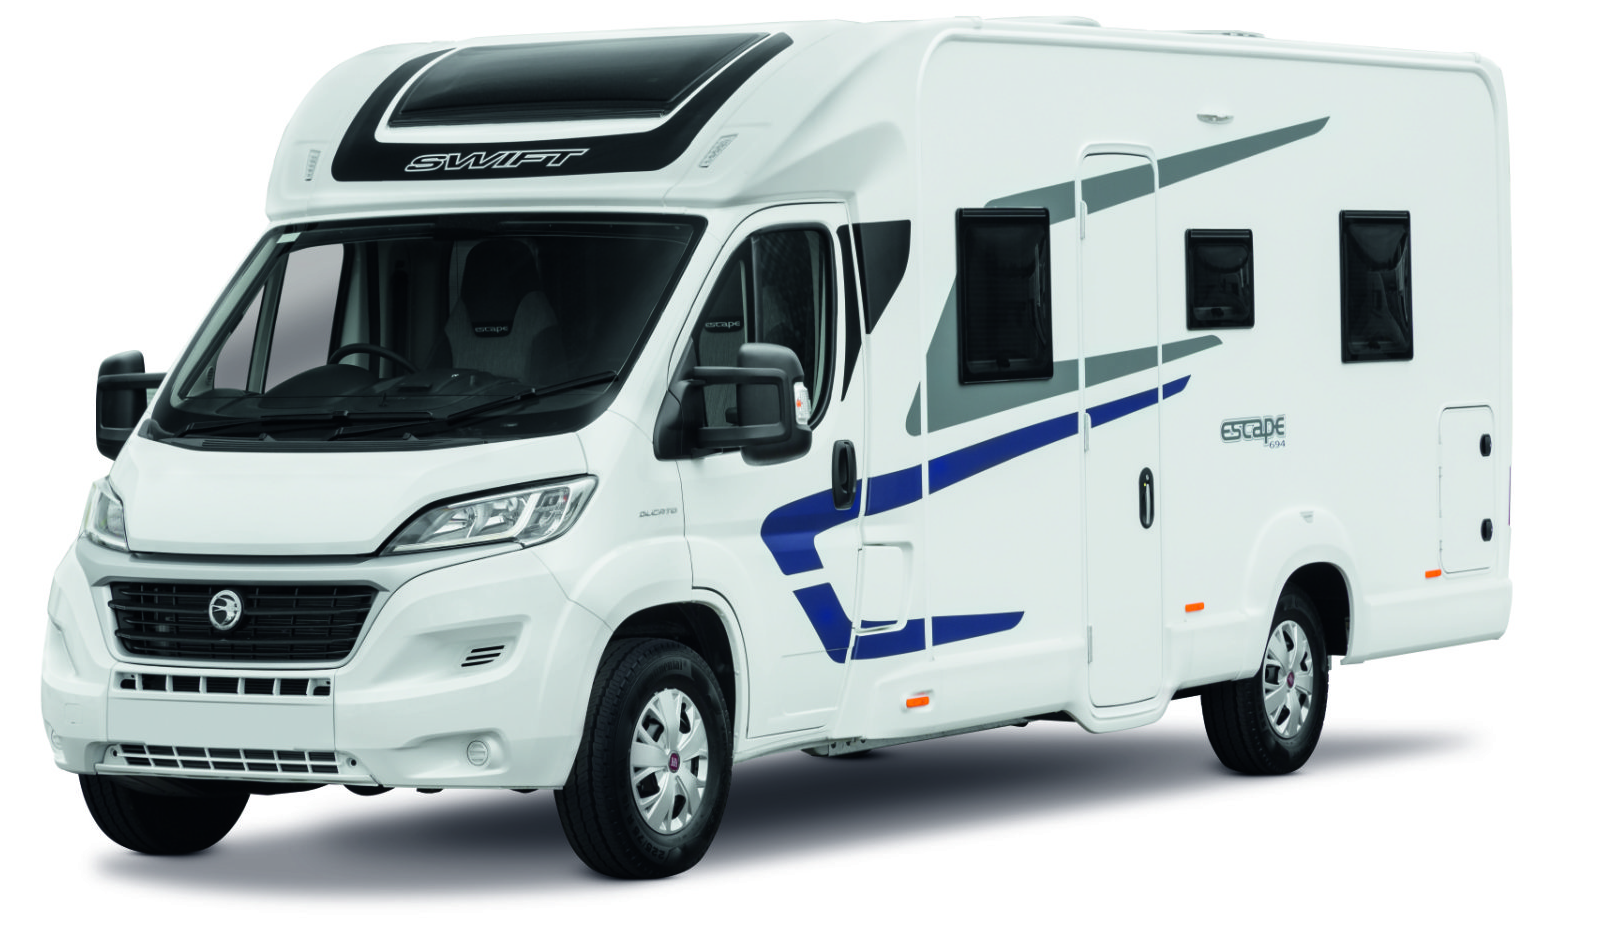 motorhome hire for 2 to 4 people, motorhome rental in UK, london, kent and essex